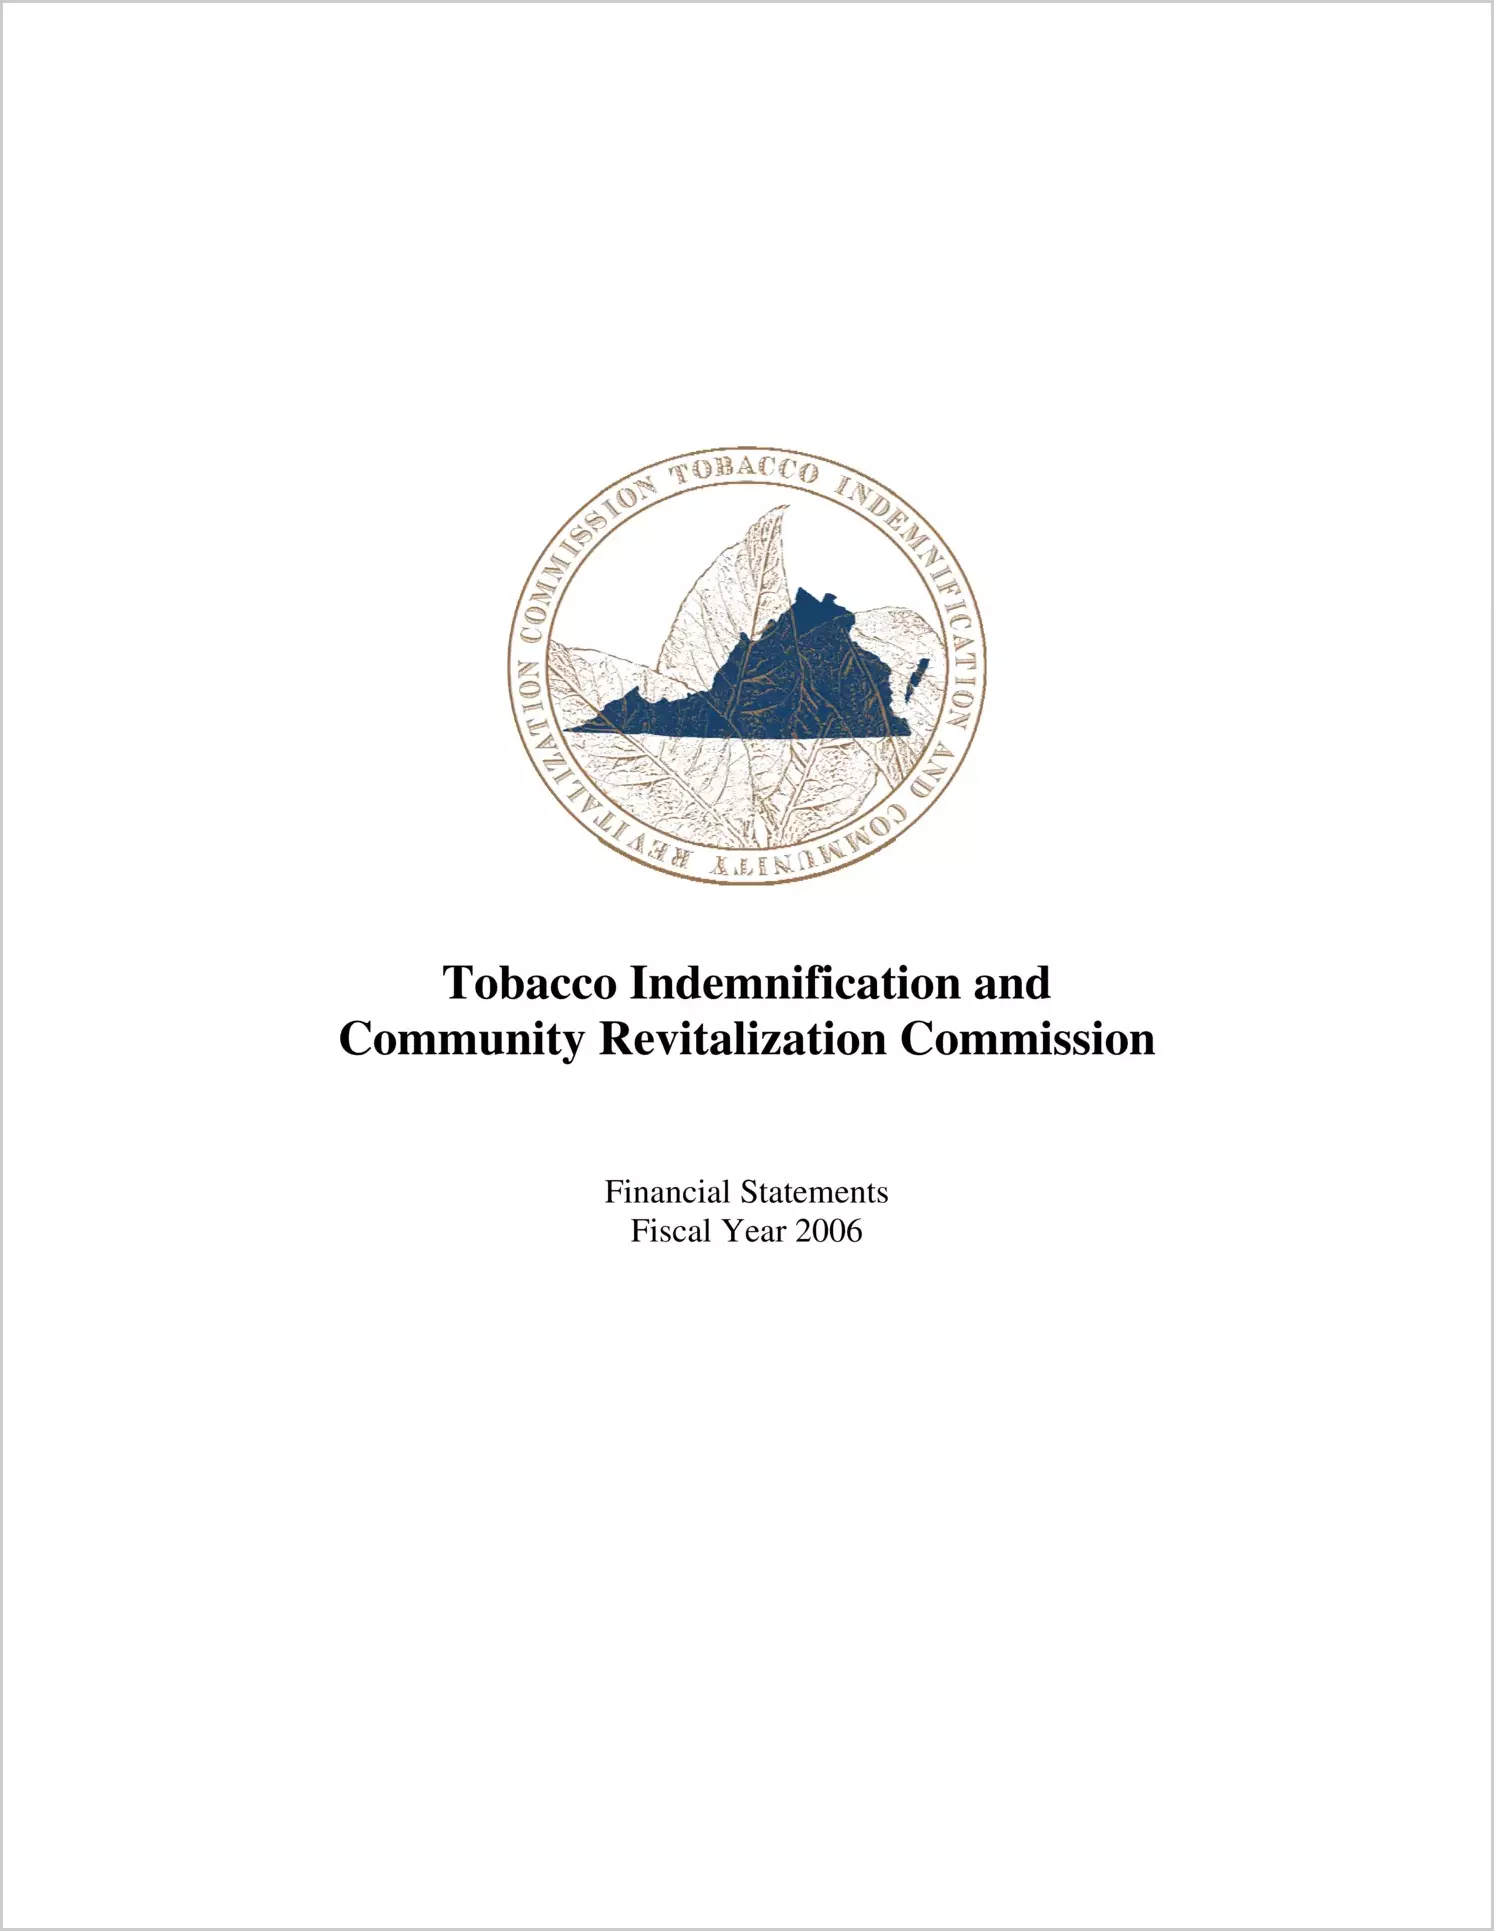 Tobacco Indemnification and Community Revitalization Commission for the year ended June 30, 2006